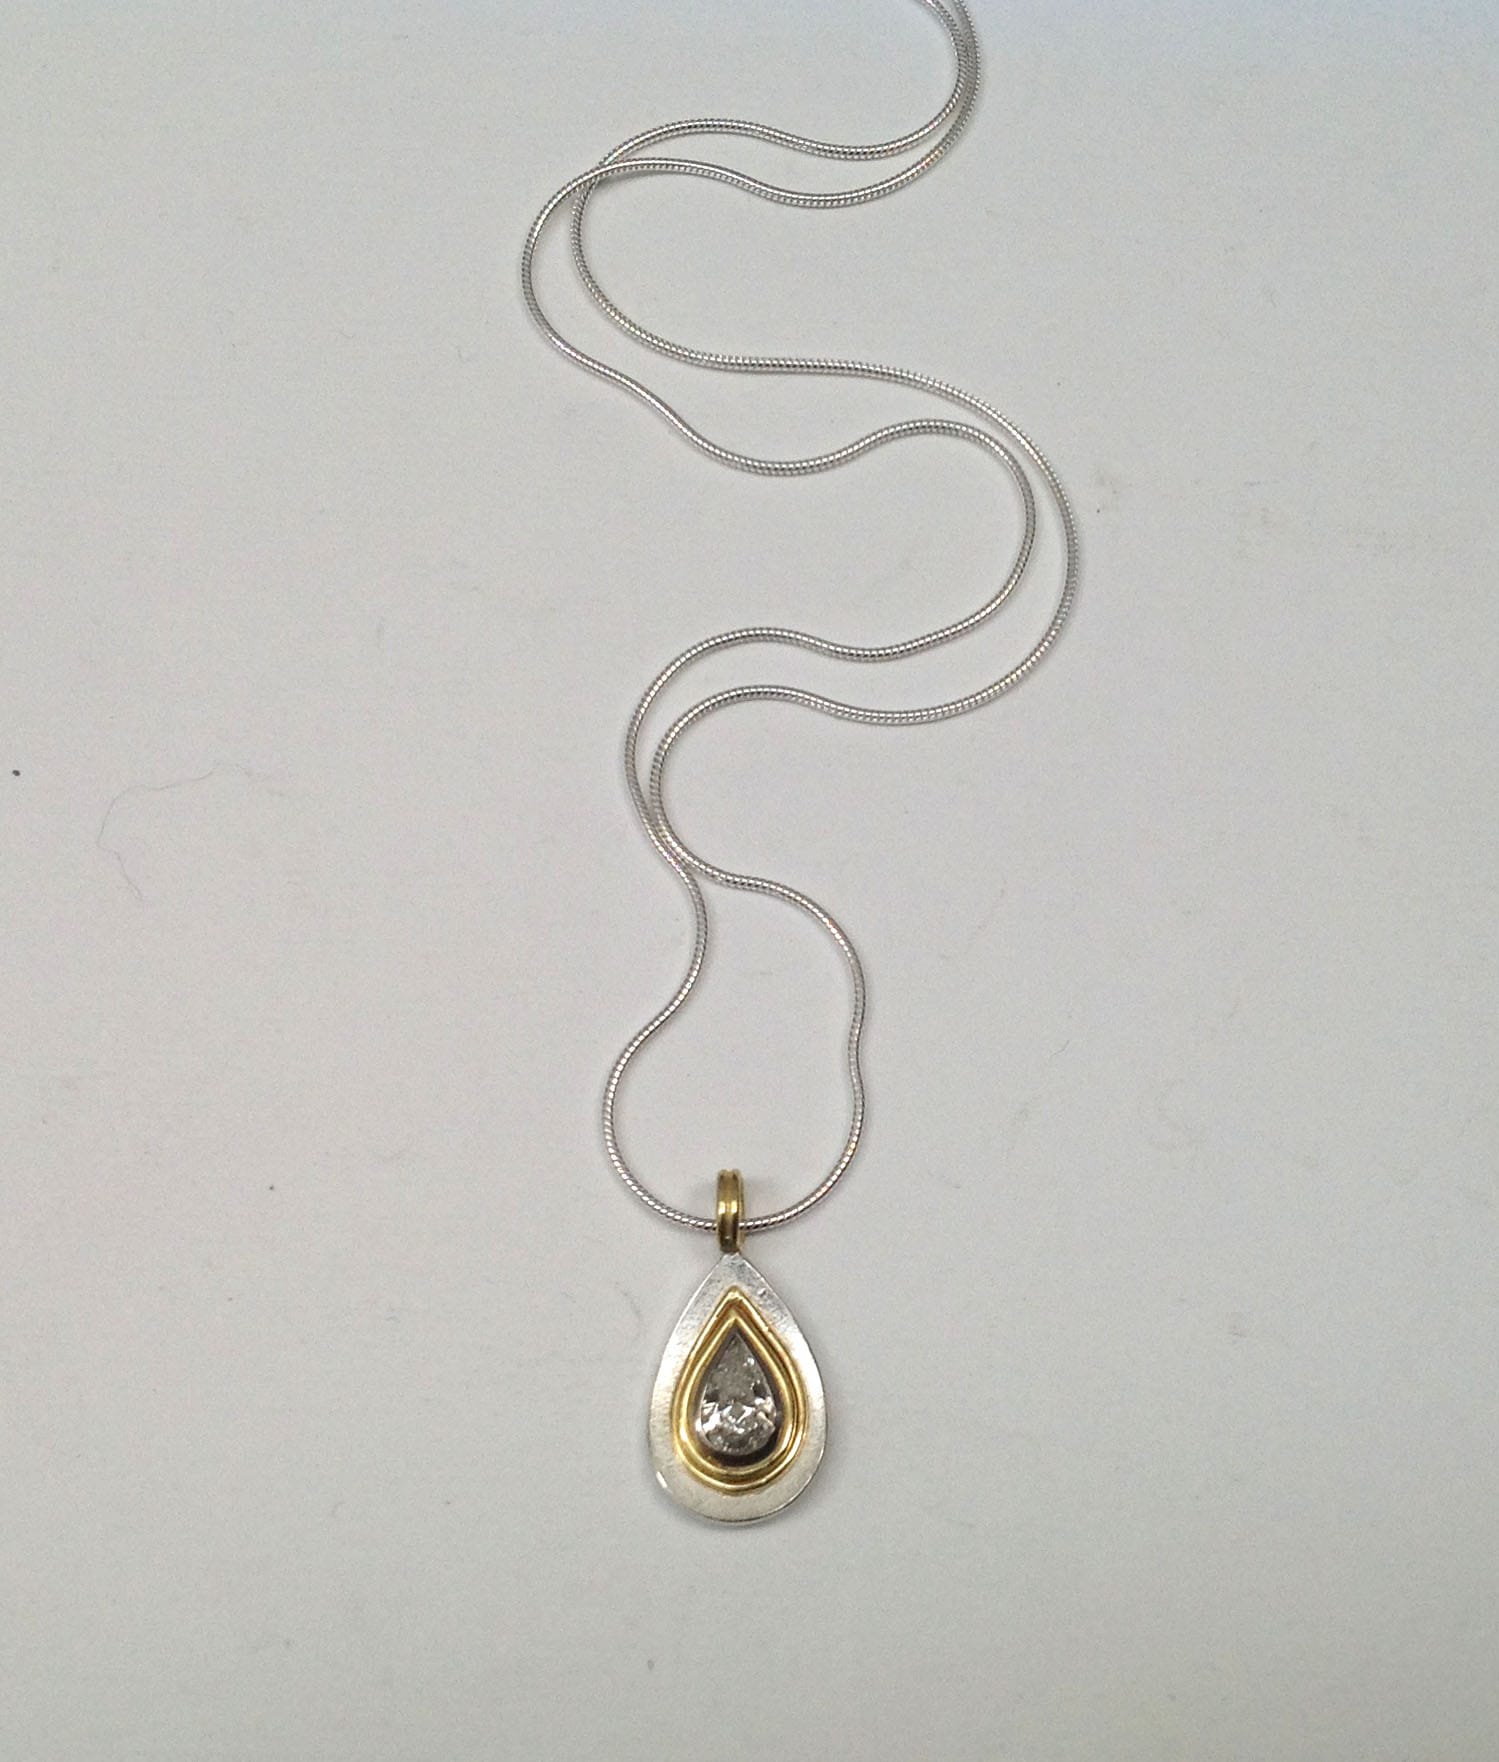 0.8 carat grey drop shape diamond set in 18 carat yellow gold, sterling silver base and chain